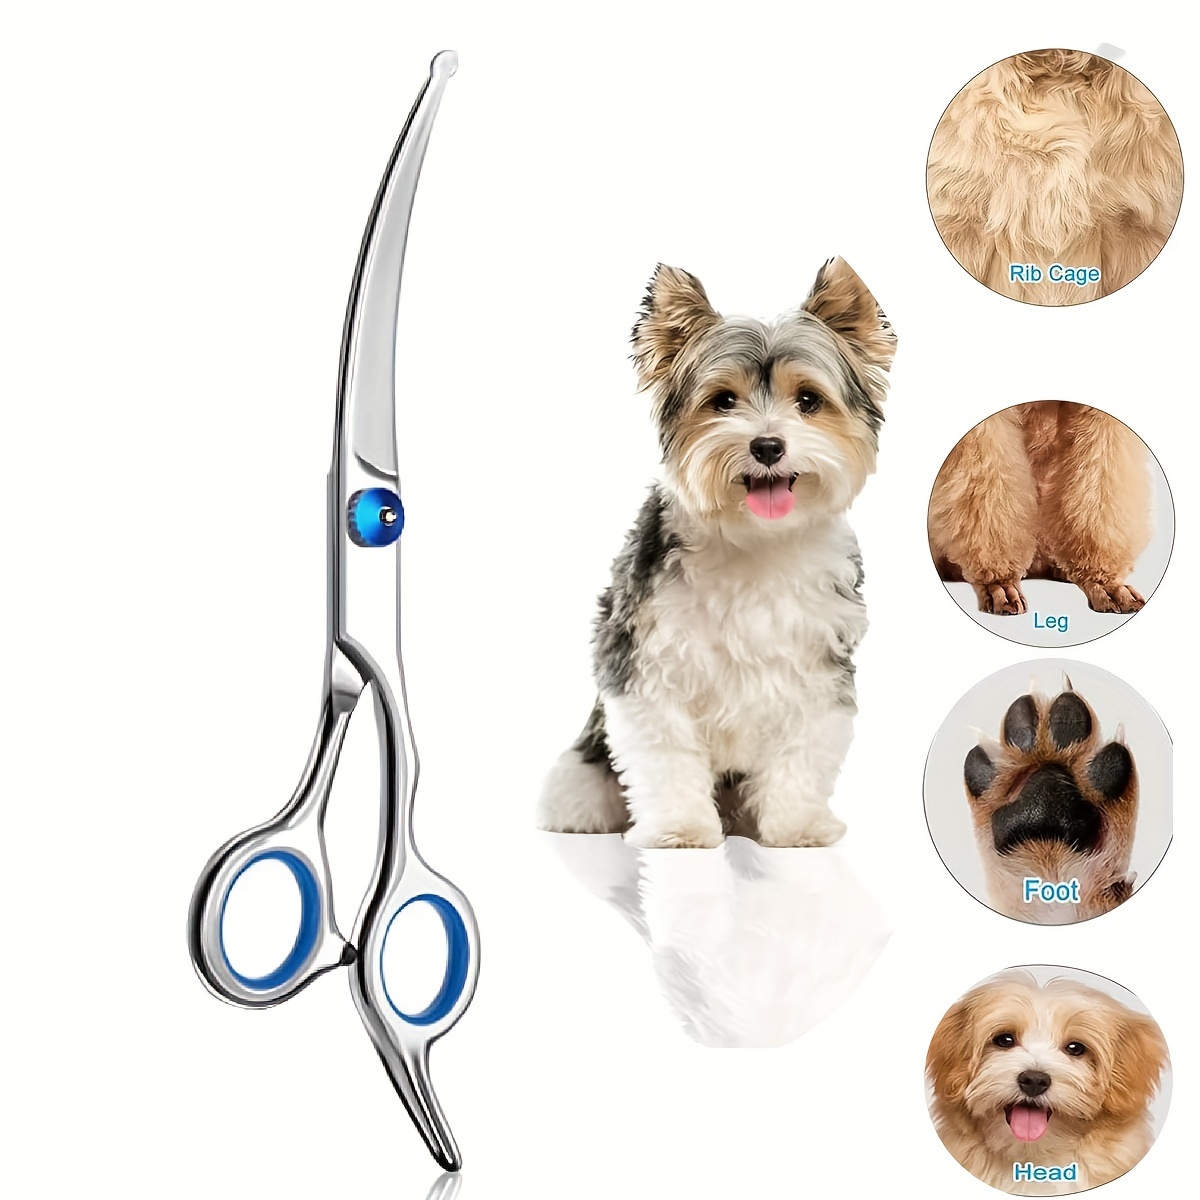 Tiny Trim 4.5 Ball-Tipped Scissor for Dog, Cat and all Pet Grooming - Ear,  Nose, Face & Paw - Scaredy Cut's small Safety Scissor Blue